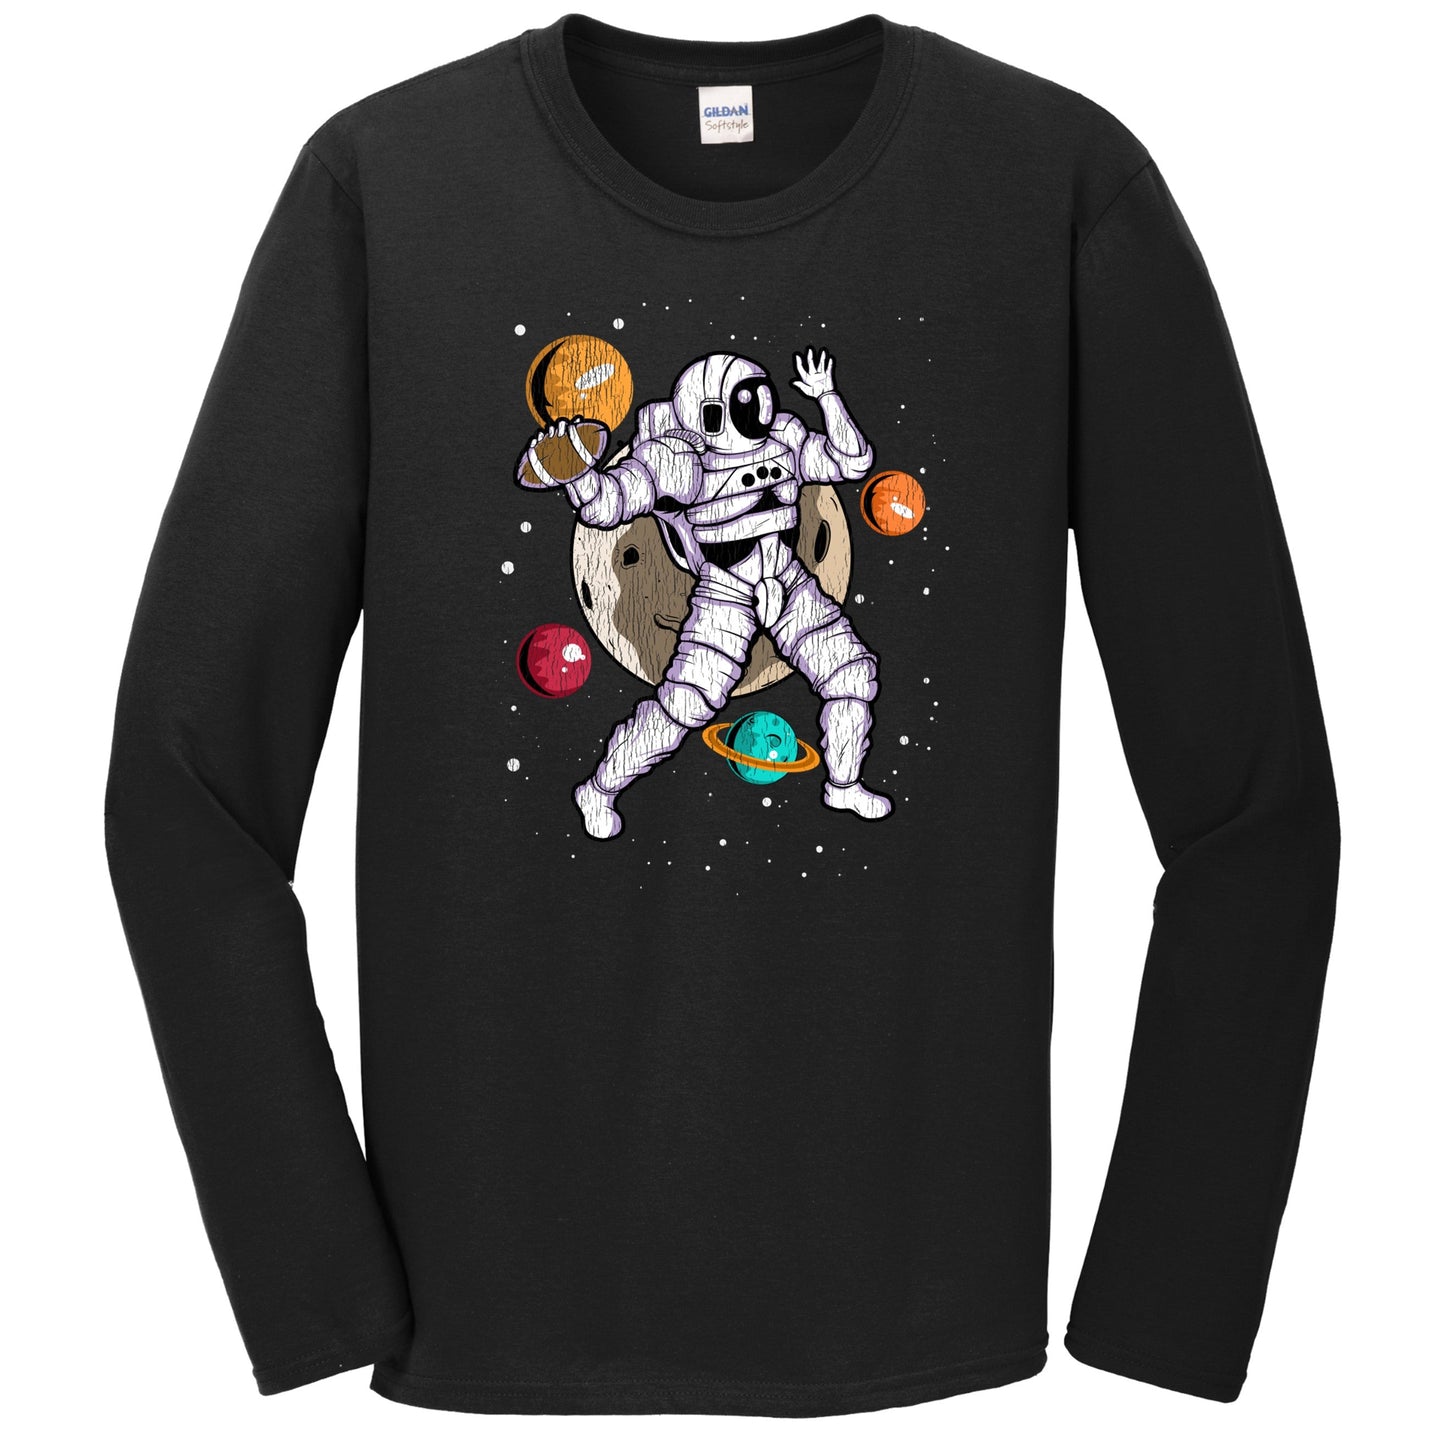 Football Quarterback Astronaut Outer Space Spaceman Distressed Long Sleeve T-Shirt